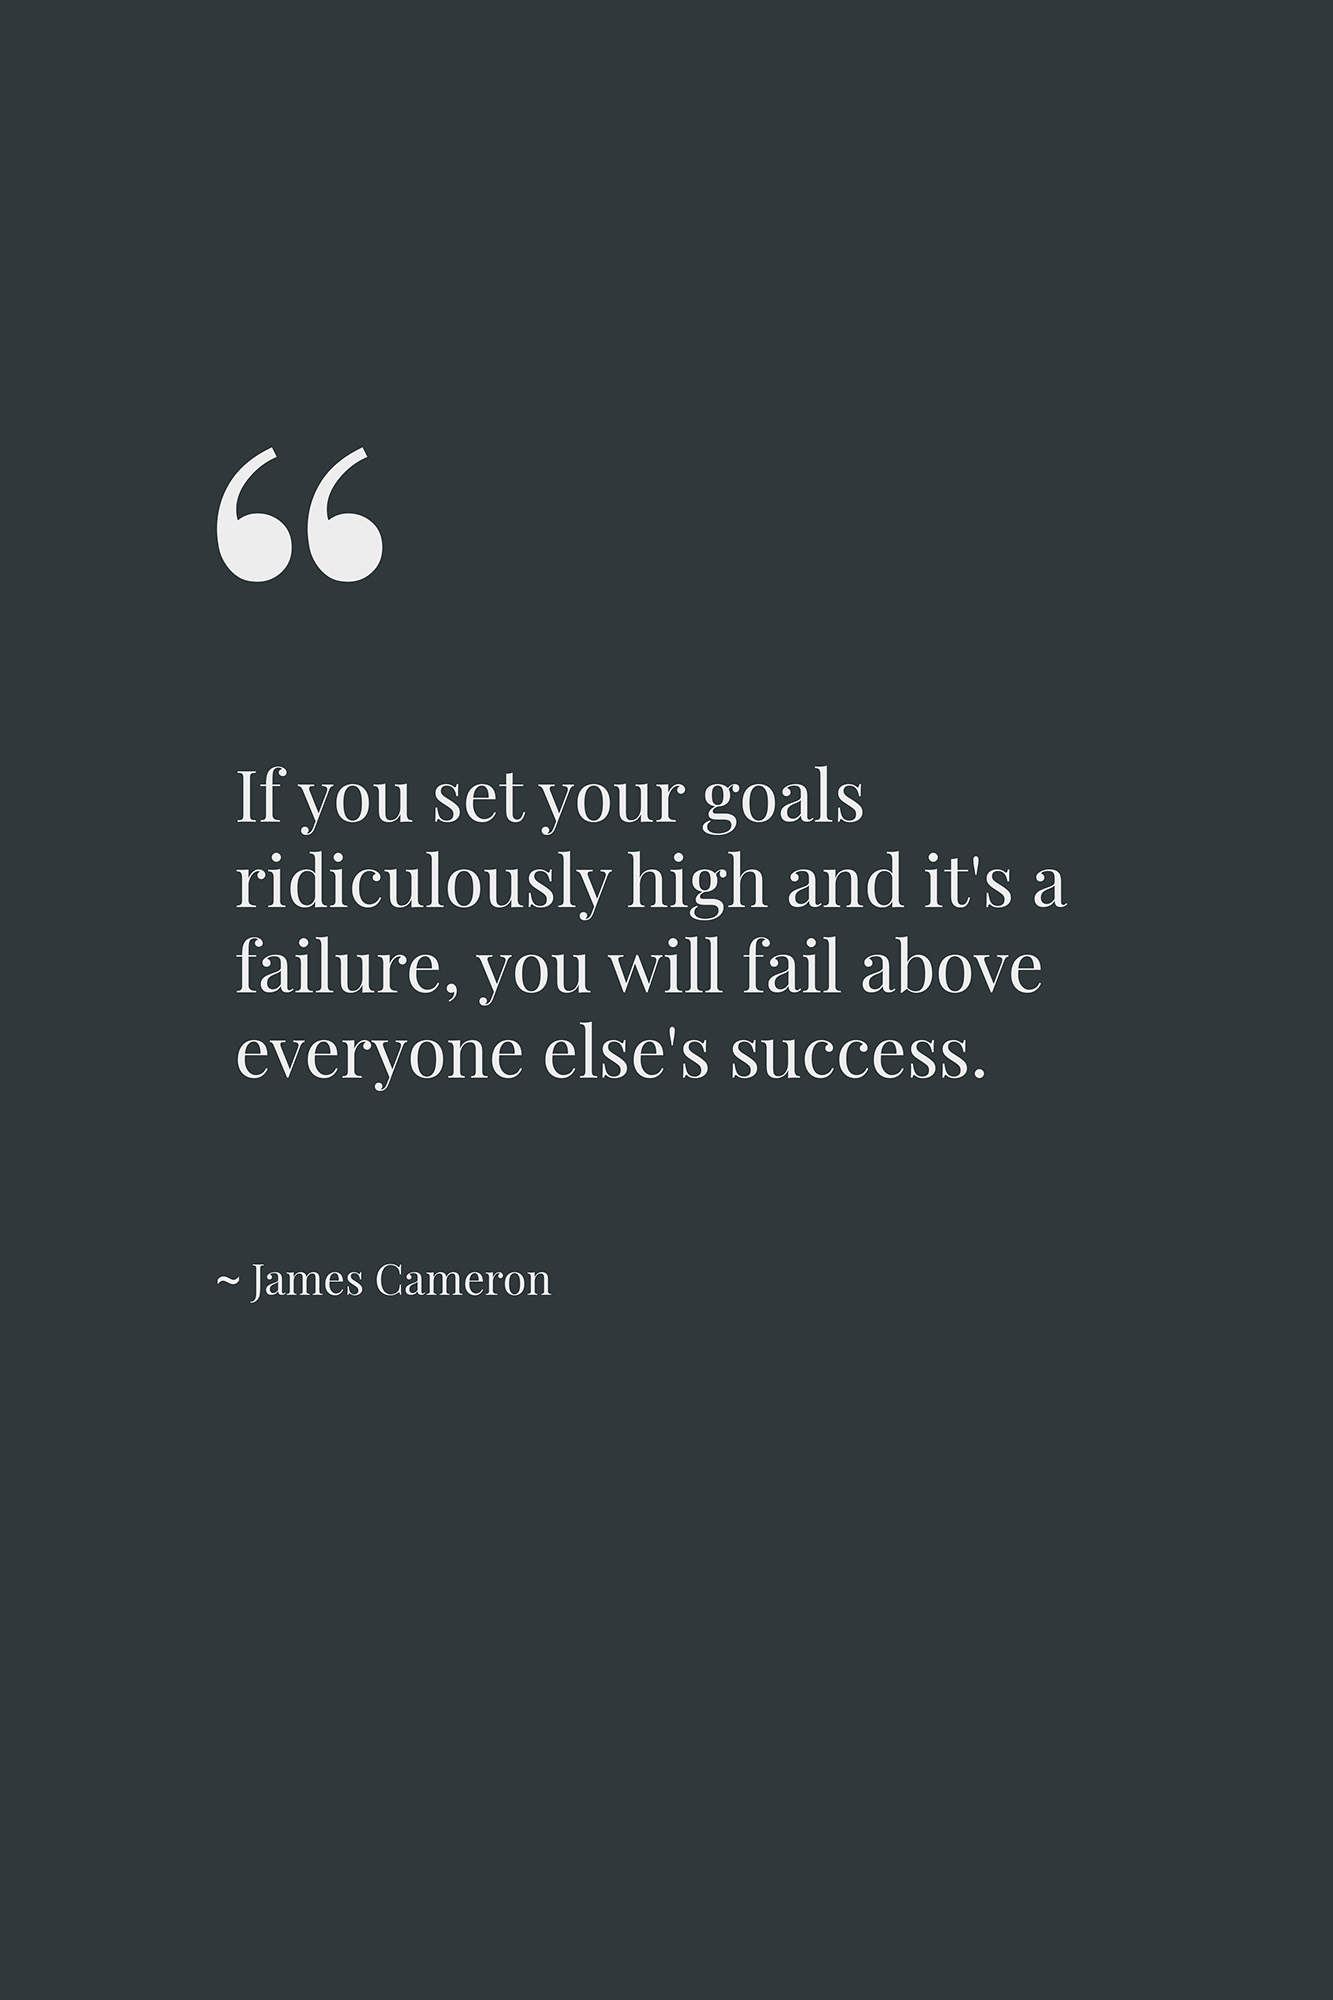 If you set your goals ridiculously high and it's a failure, you will fail above everyone else's success. ~ James Cameron